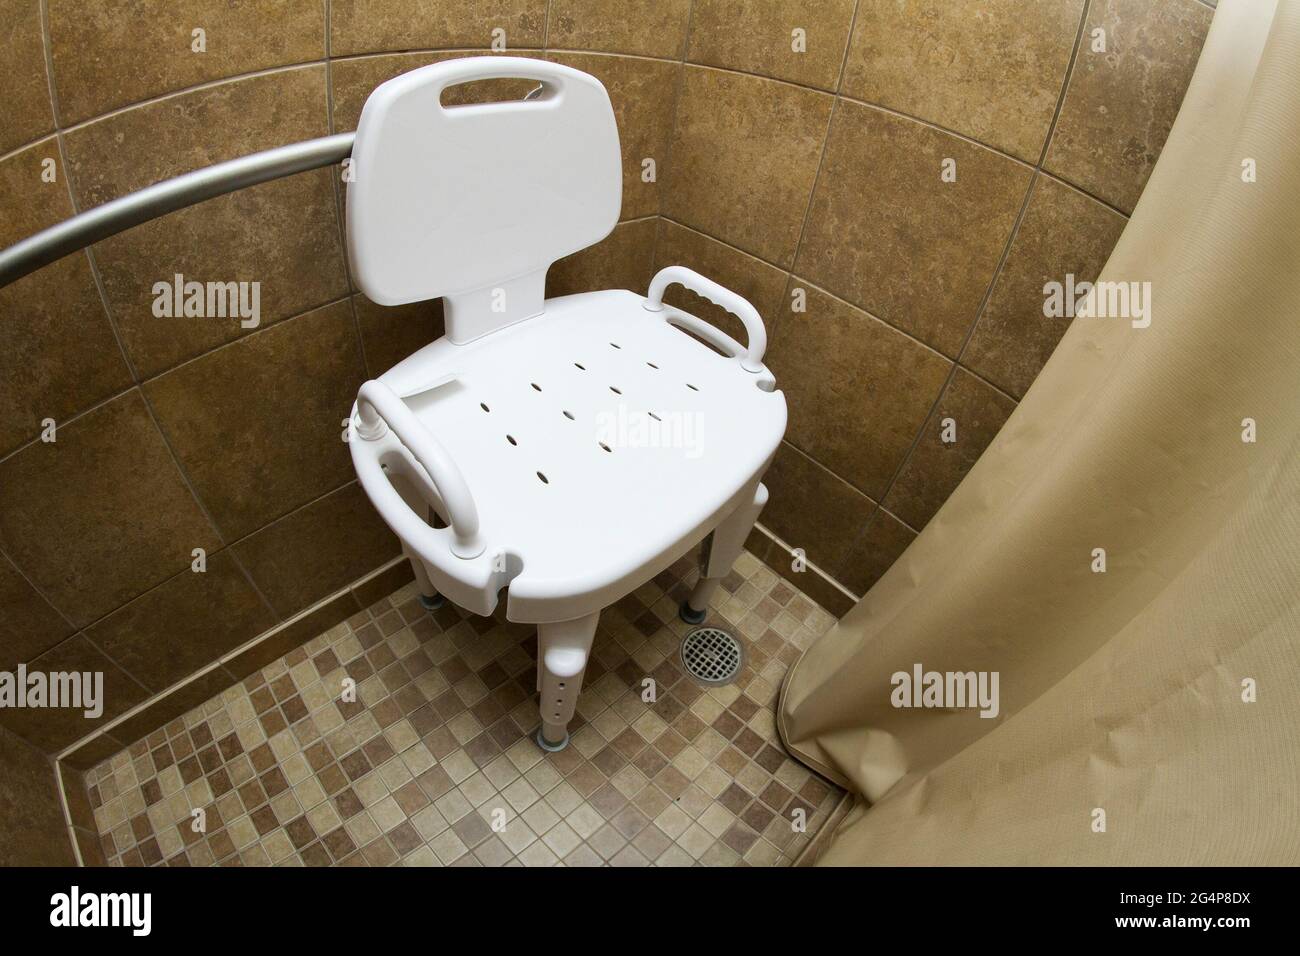 shower seat in a bathroom Stock Photo